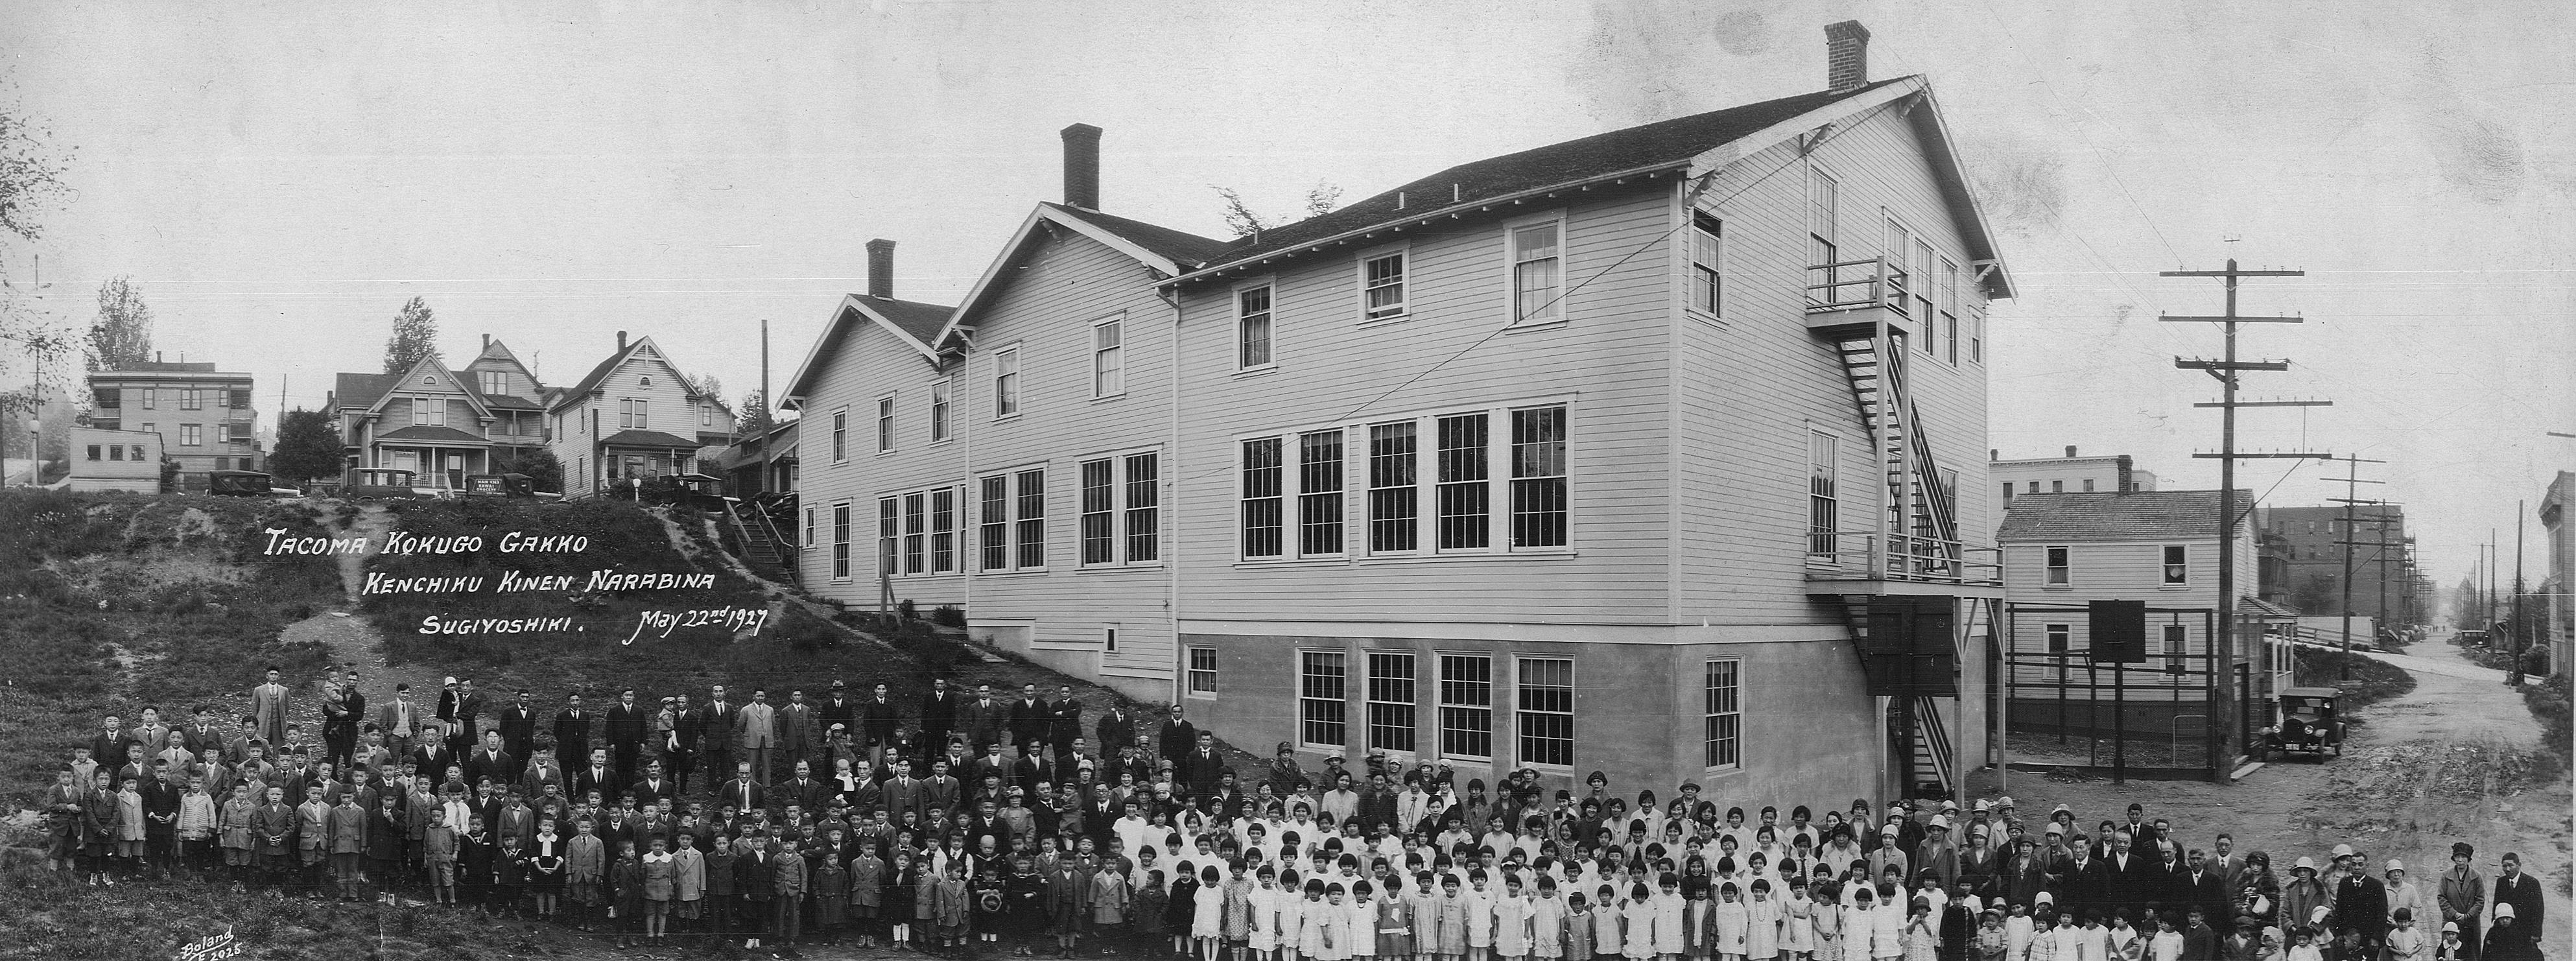 Photo of students and faculty of the Tacoma Japanese Language School standing in front of the building in 1927 